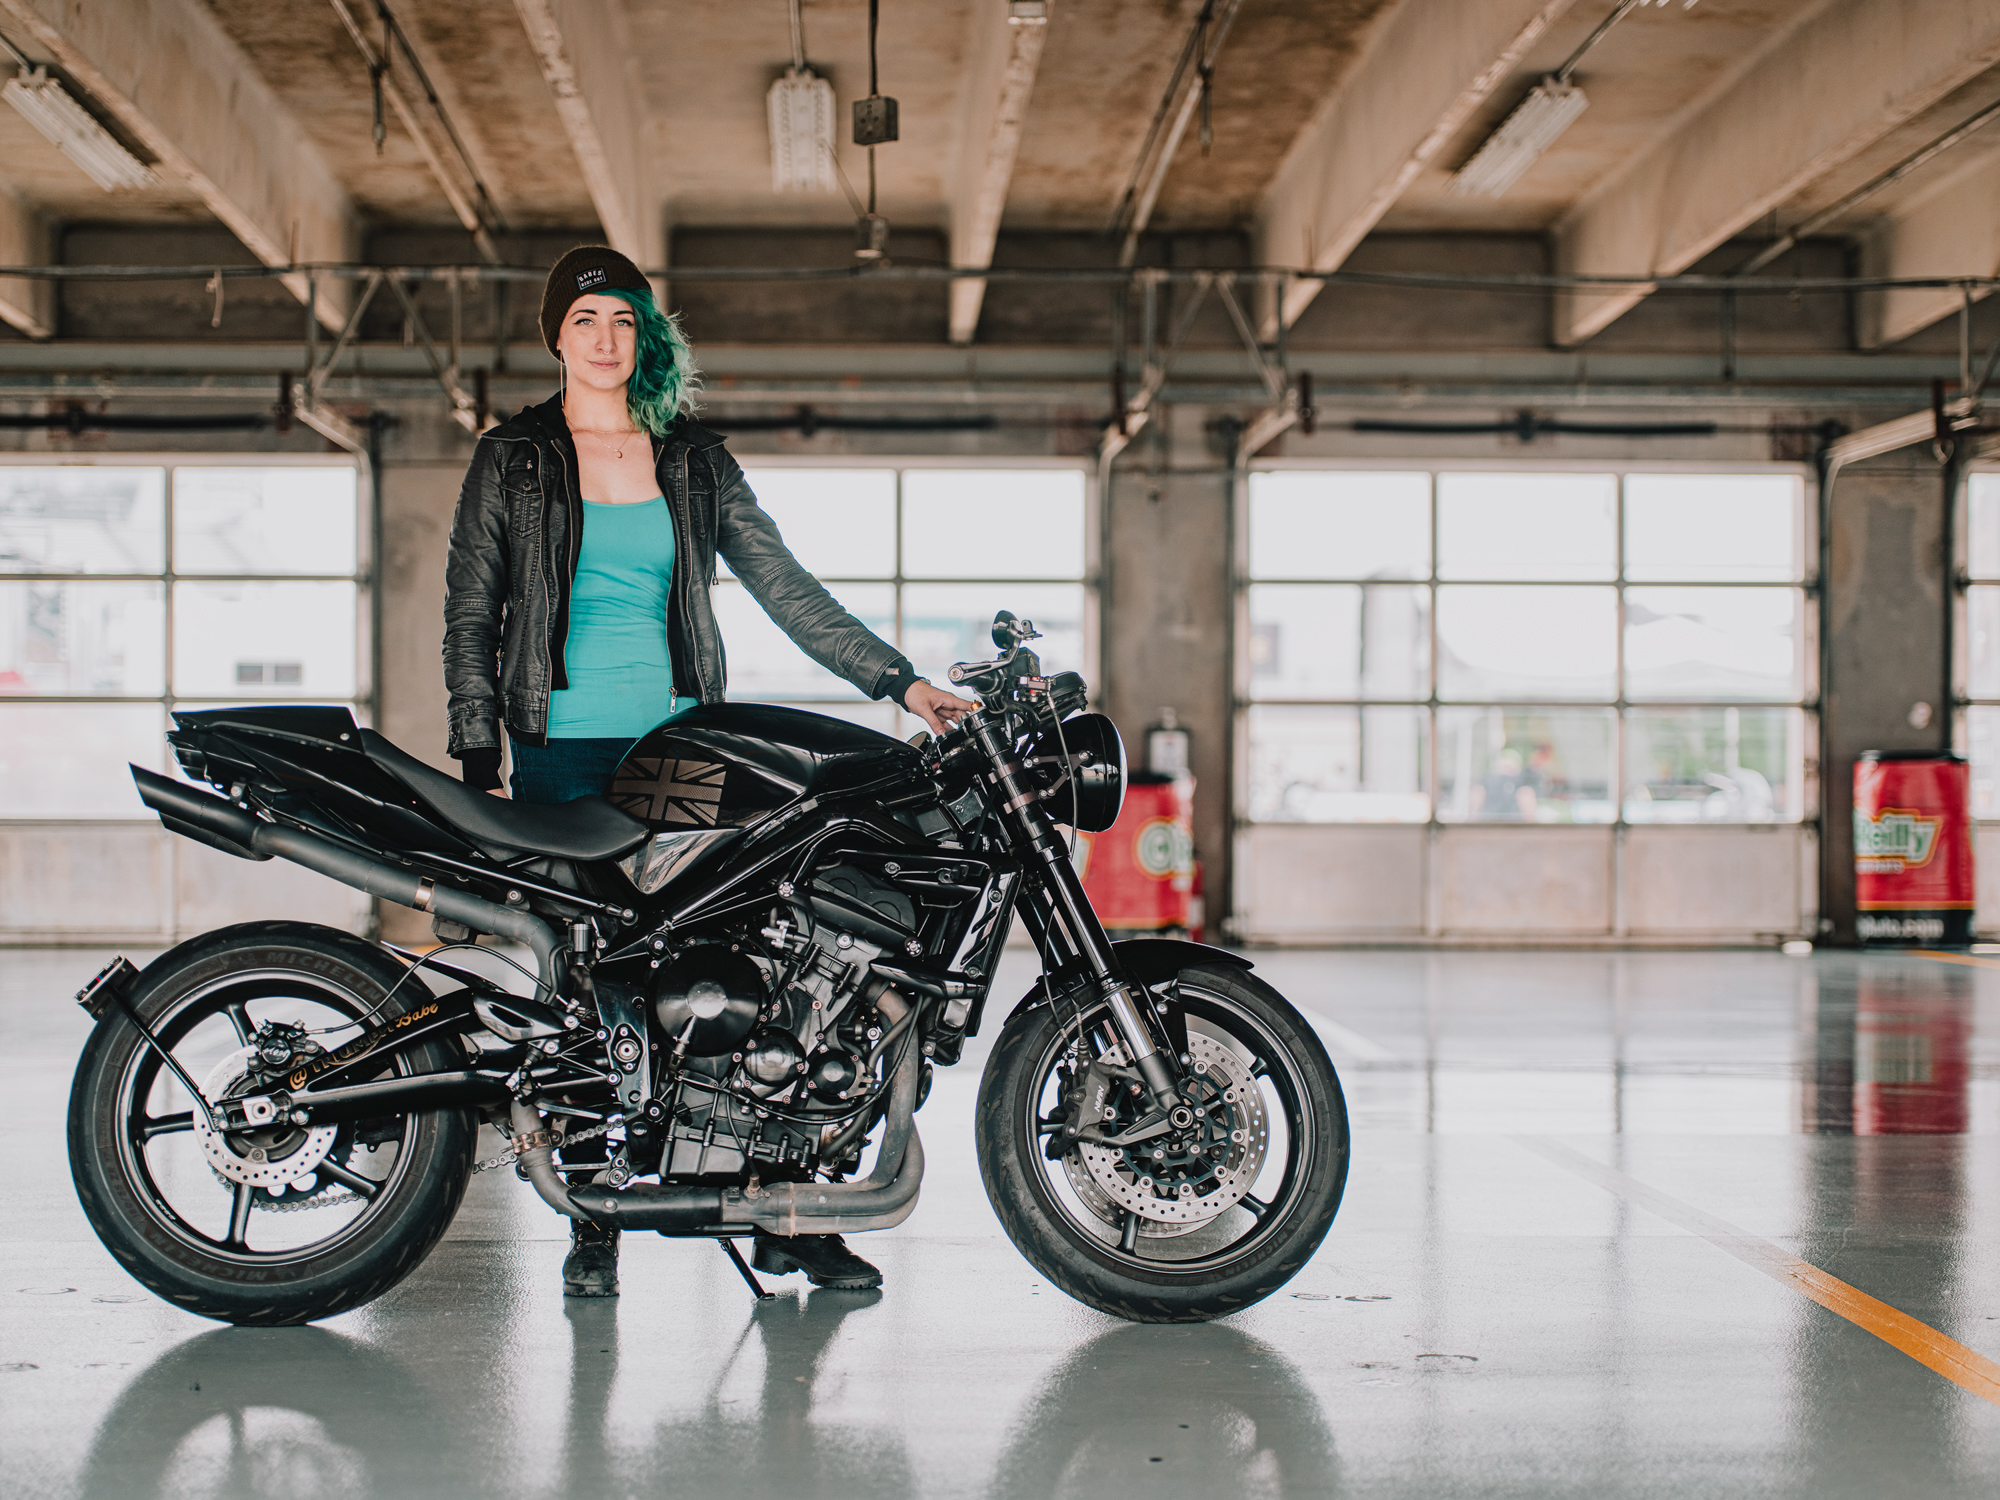 Women's Motorcycle Show 2021 - Adrienne Driggs